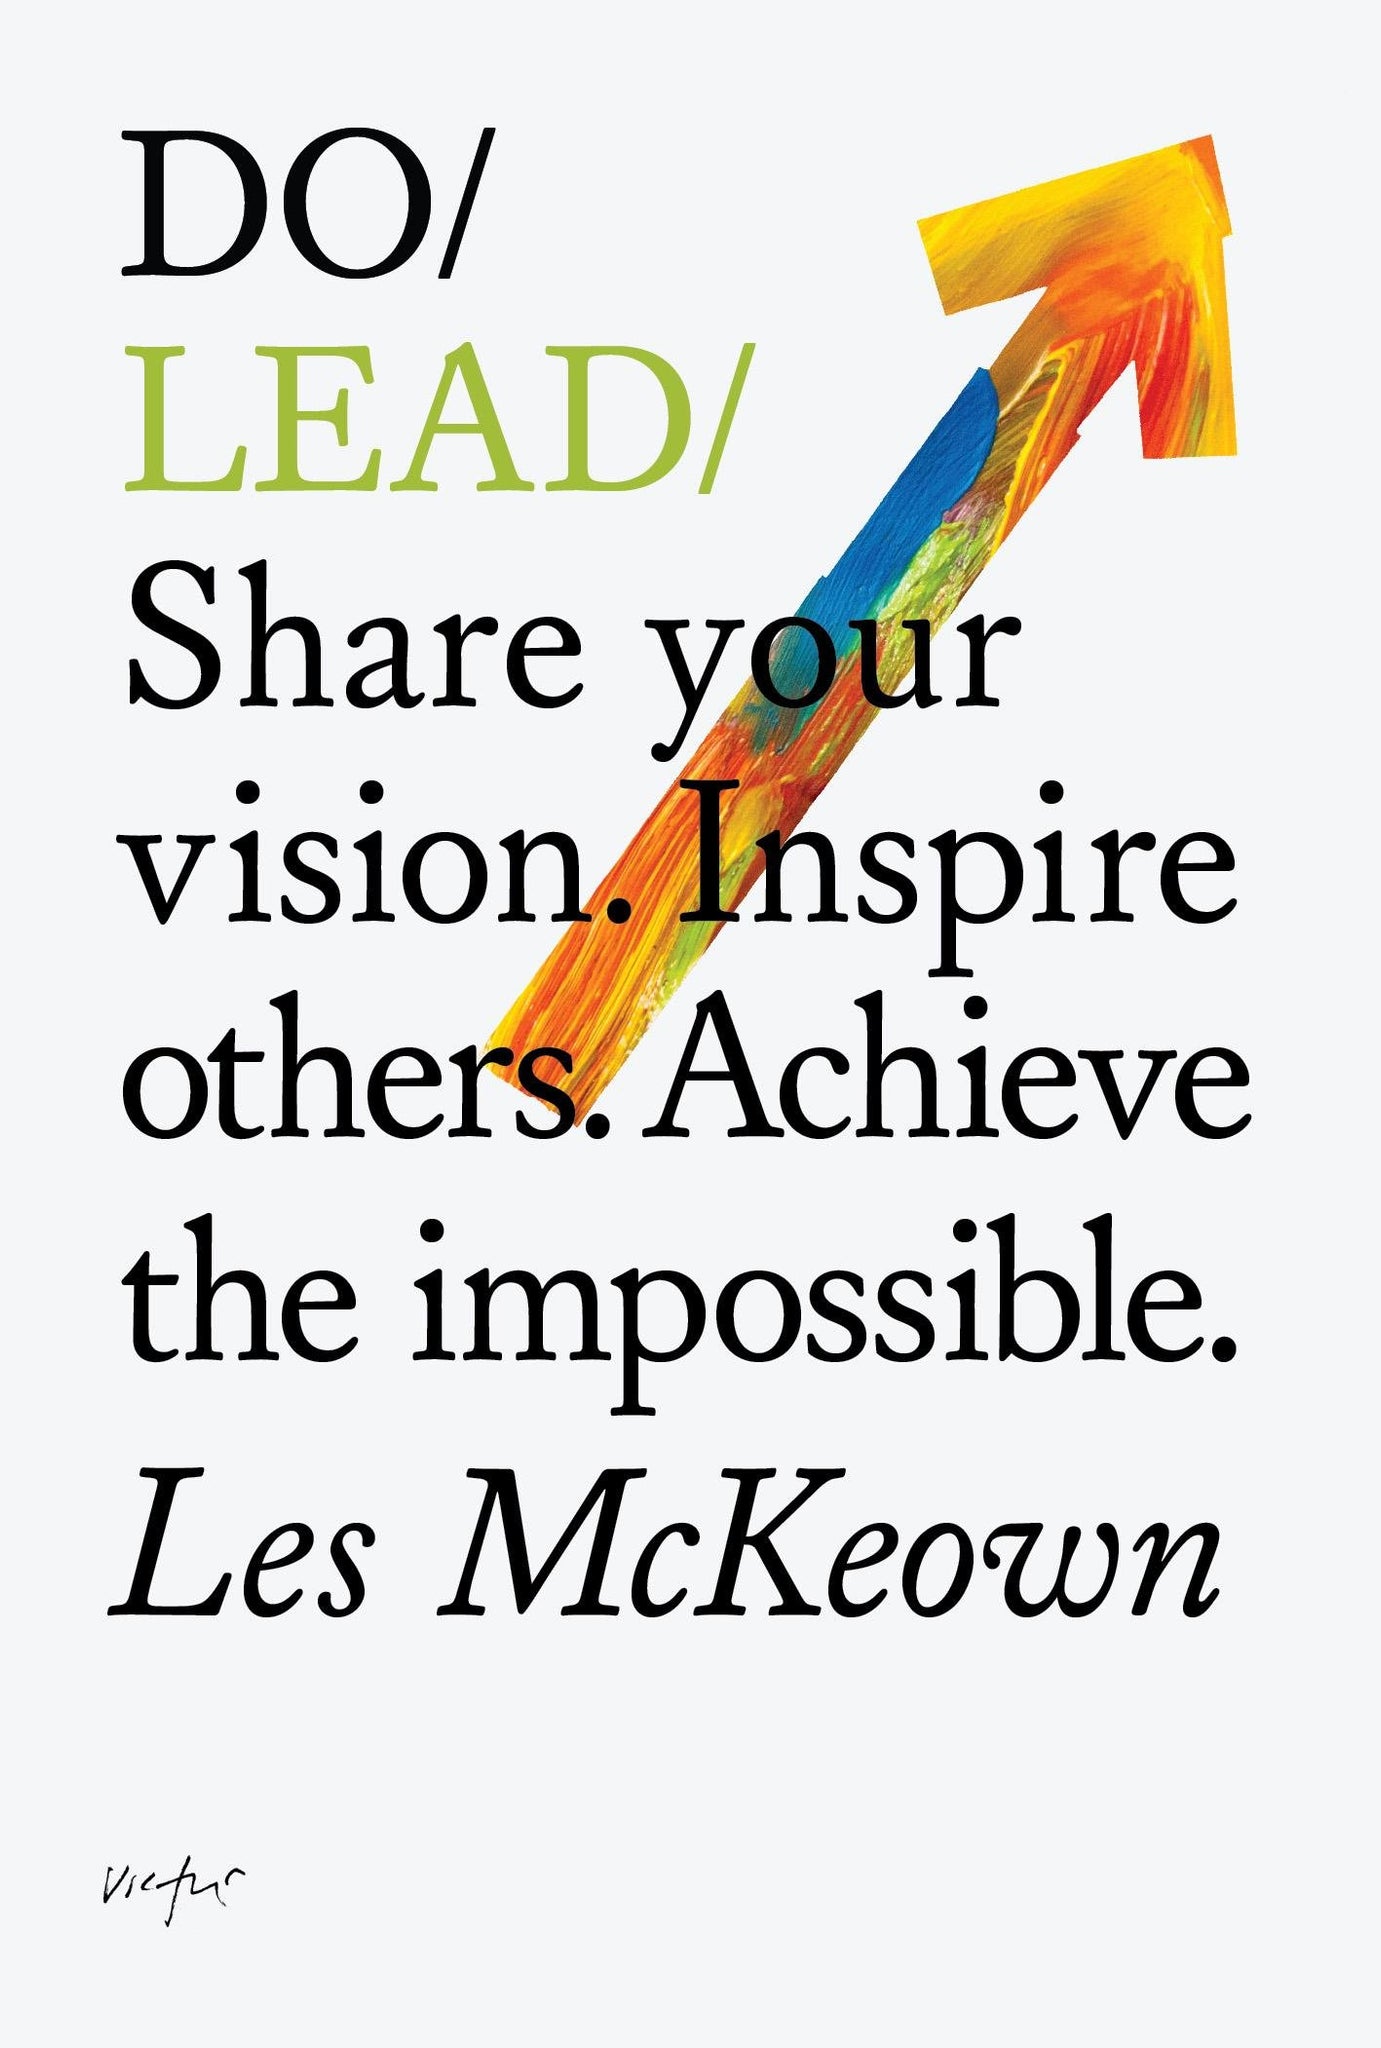 Do Lead: Share Your Vision. Inspire Others. Achieve the Impossible